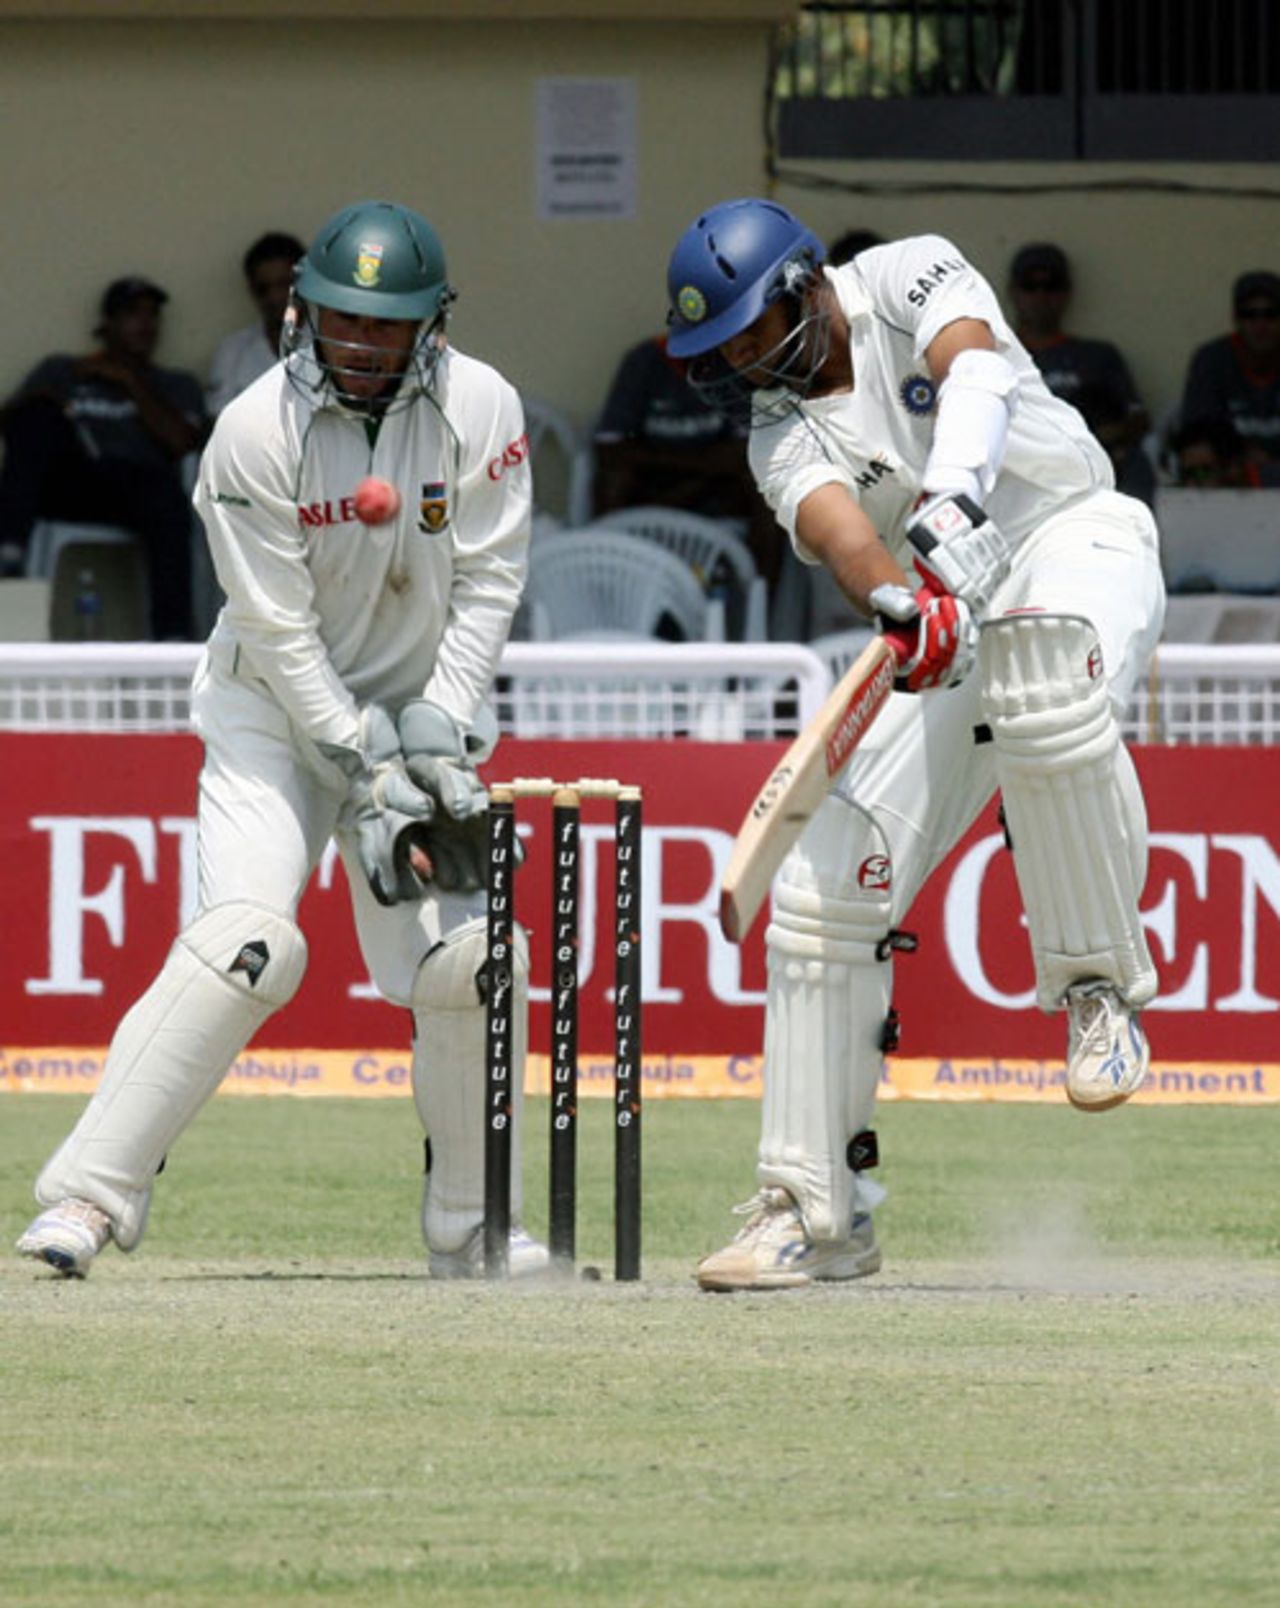 Rahul Dravid manages to defend a ball that pitched on the rough, India v South Africa, 3rd Test, Kanpur, 2nd day, April 12, 2008 